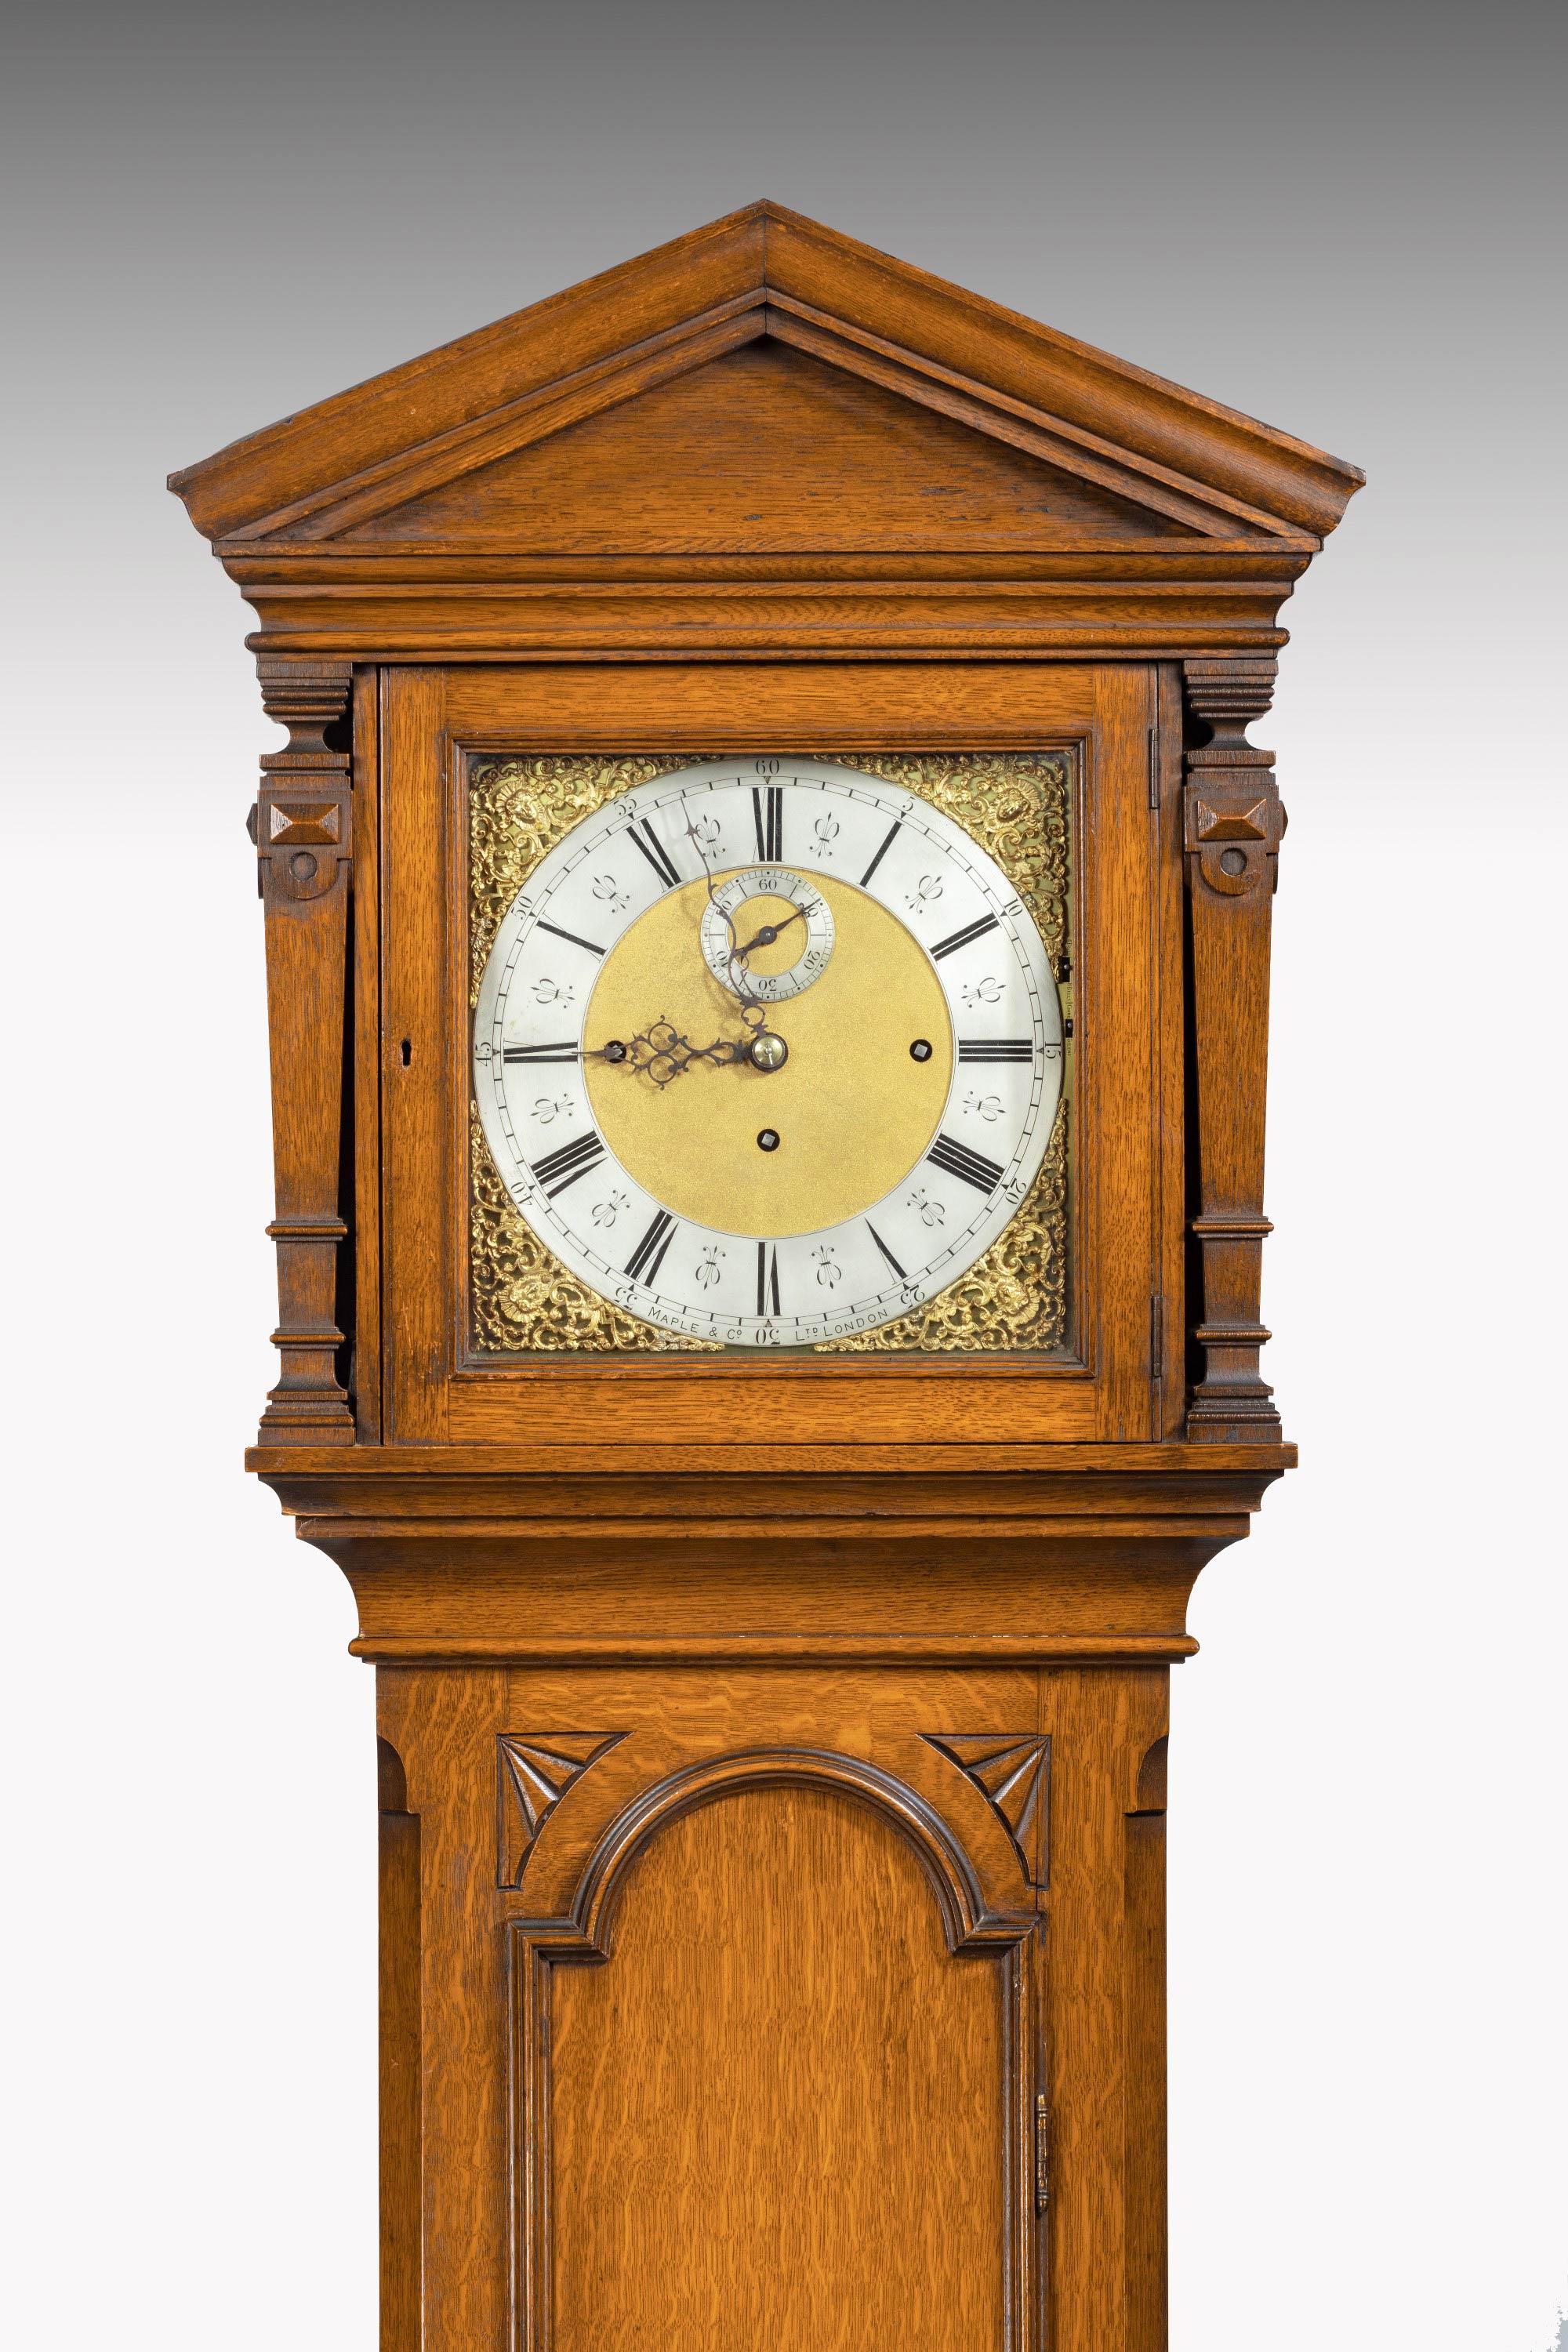 Early 20th century longcase maples and company clock from Grimshaw Baxter & Elliott catalogue 1922. This clock would have cost £127 when new. Grimshaw Baxter & Elliott made clocks for Maples (Croydon factory) With 8 bells Whittington chime but 4